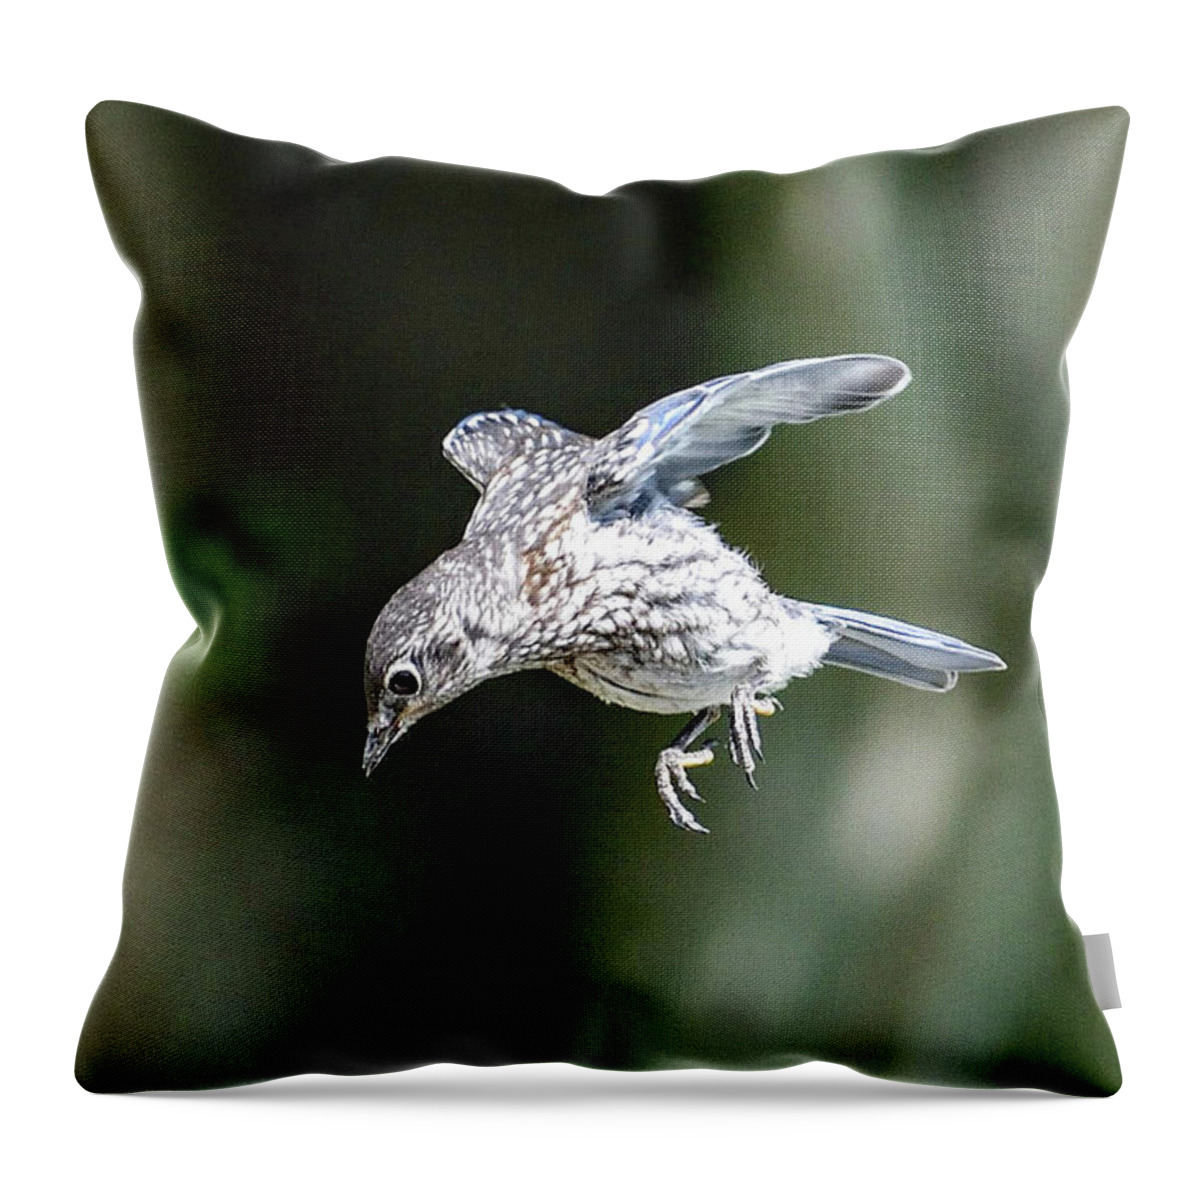 Eastern Bluebird Throw Pillow featuring the photograph Prince Charming Takes A Leap Of Faith - Eastern Bluebird by Cindy Treger